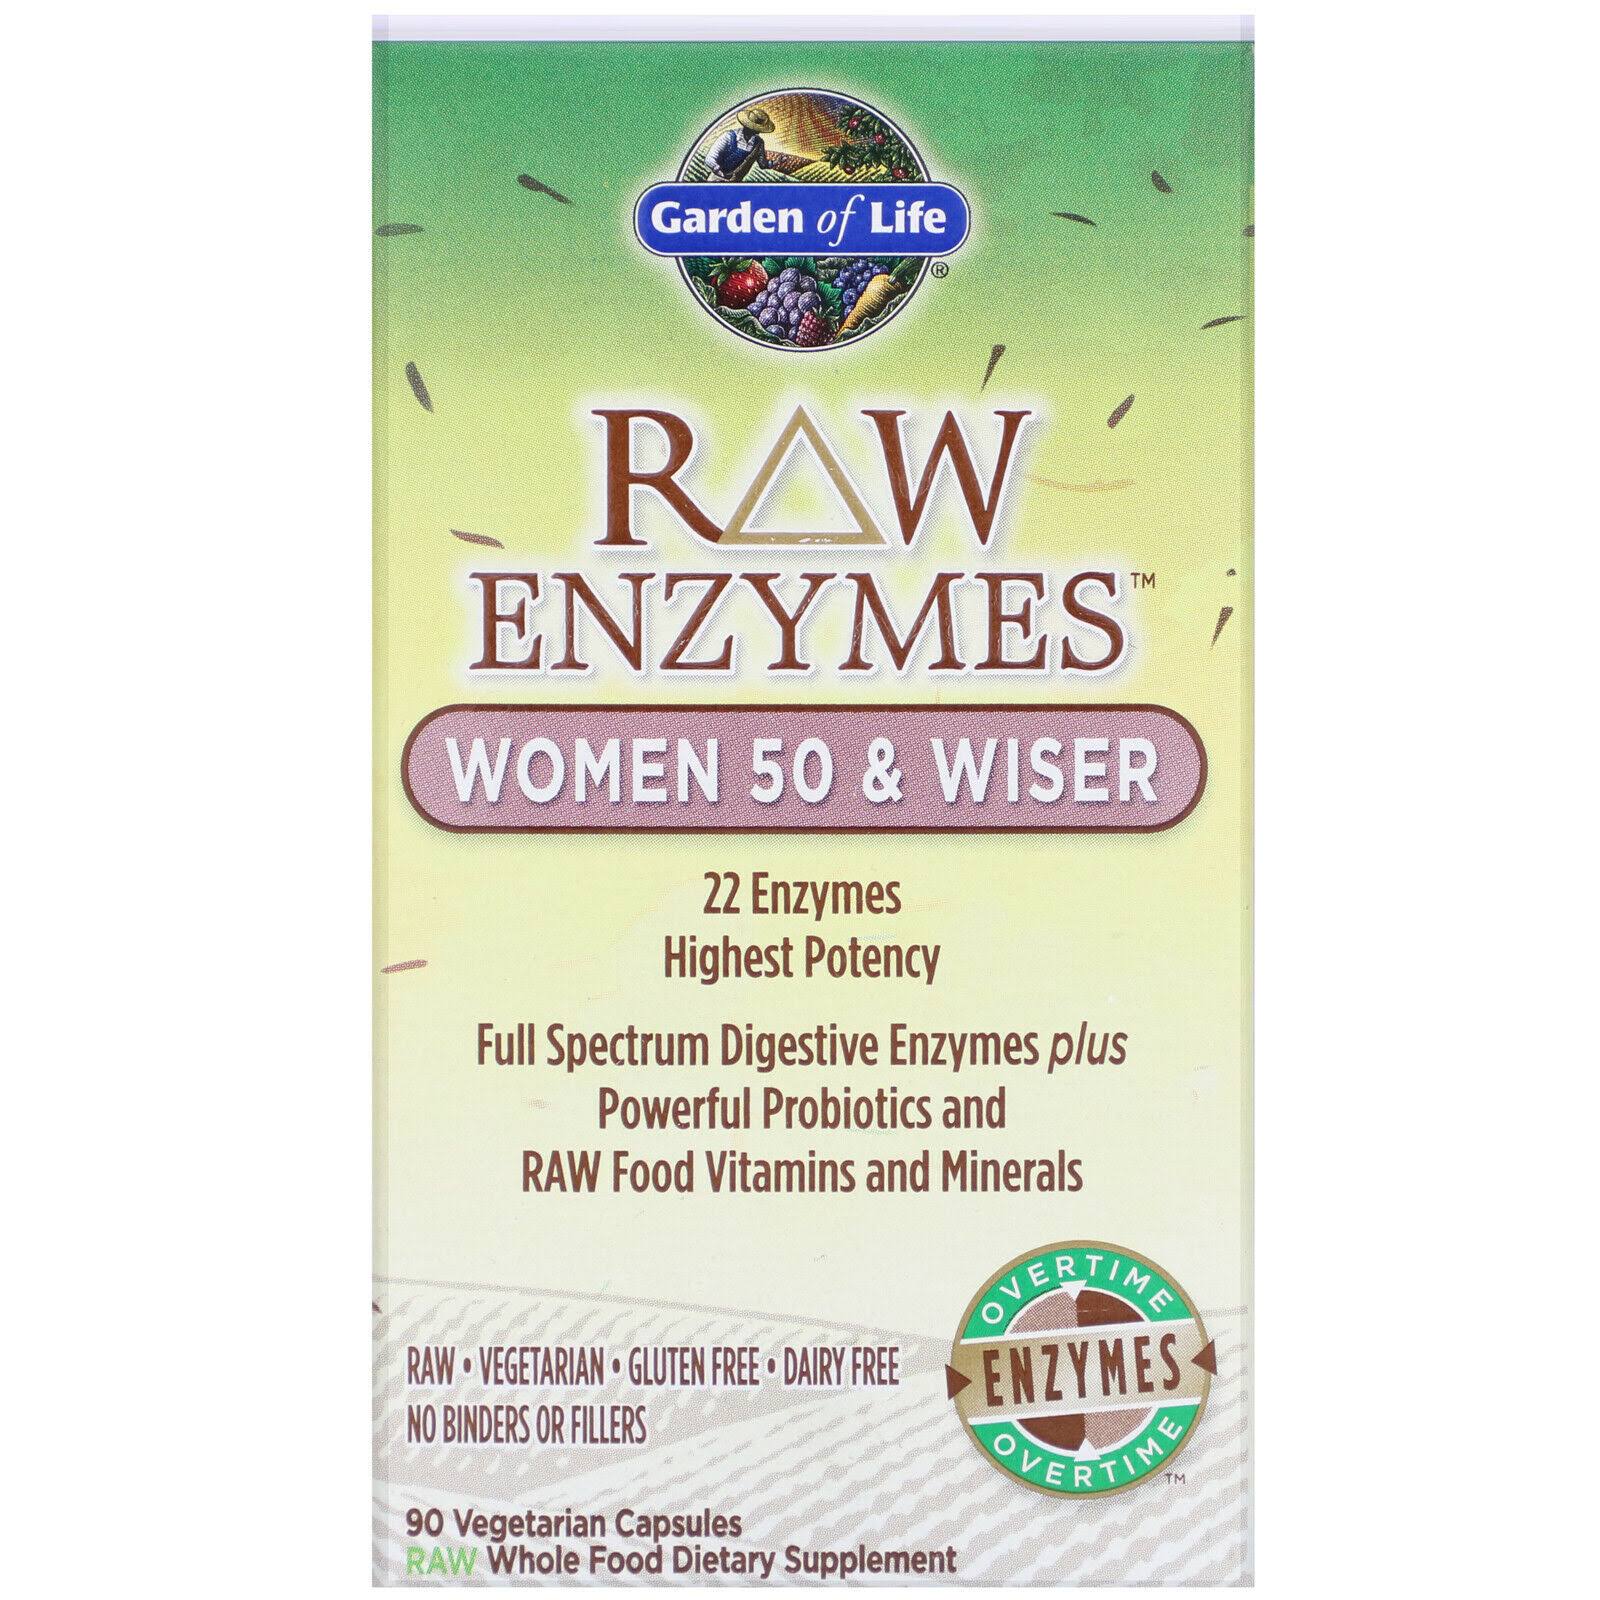 Garden of Life Raw Enzymes Women 50 & Wiser - 90 Capsules